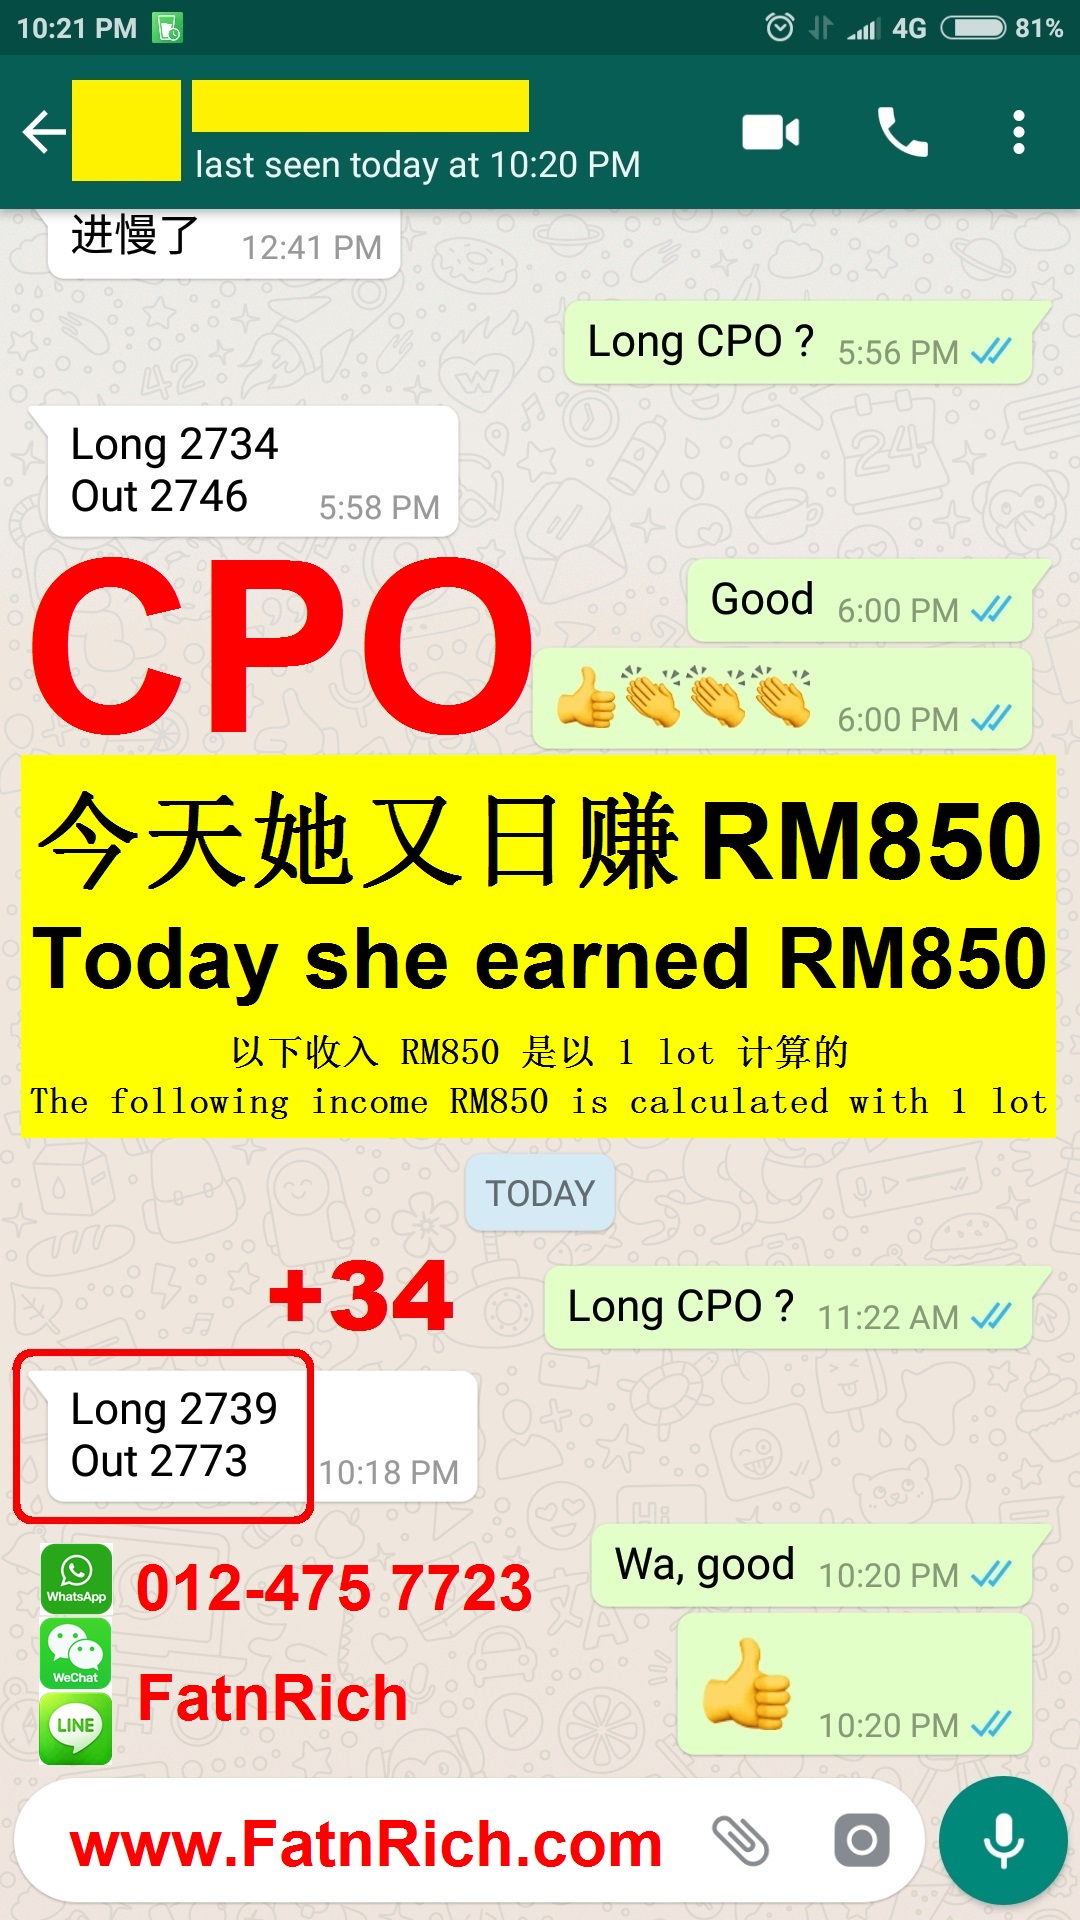 She earned RM850 today